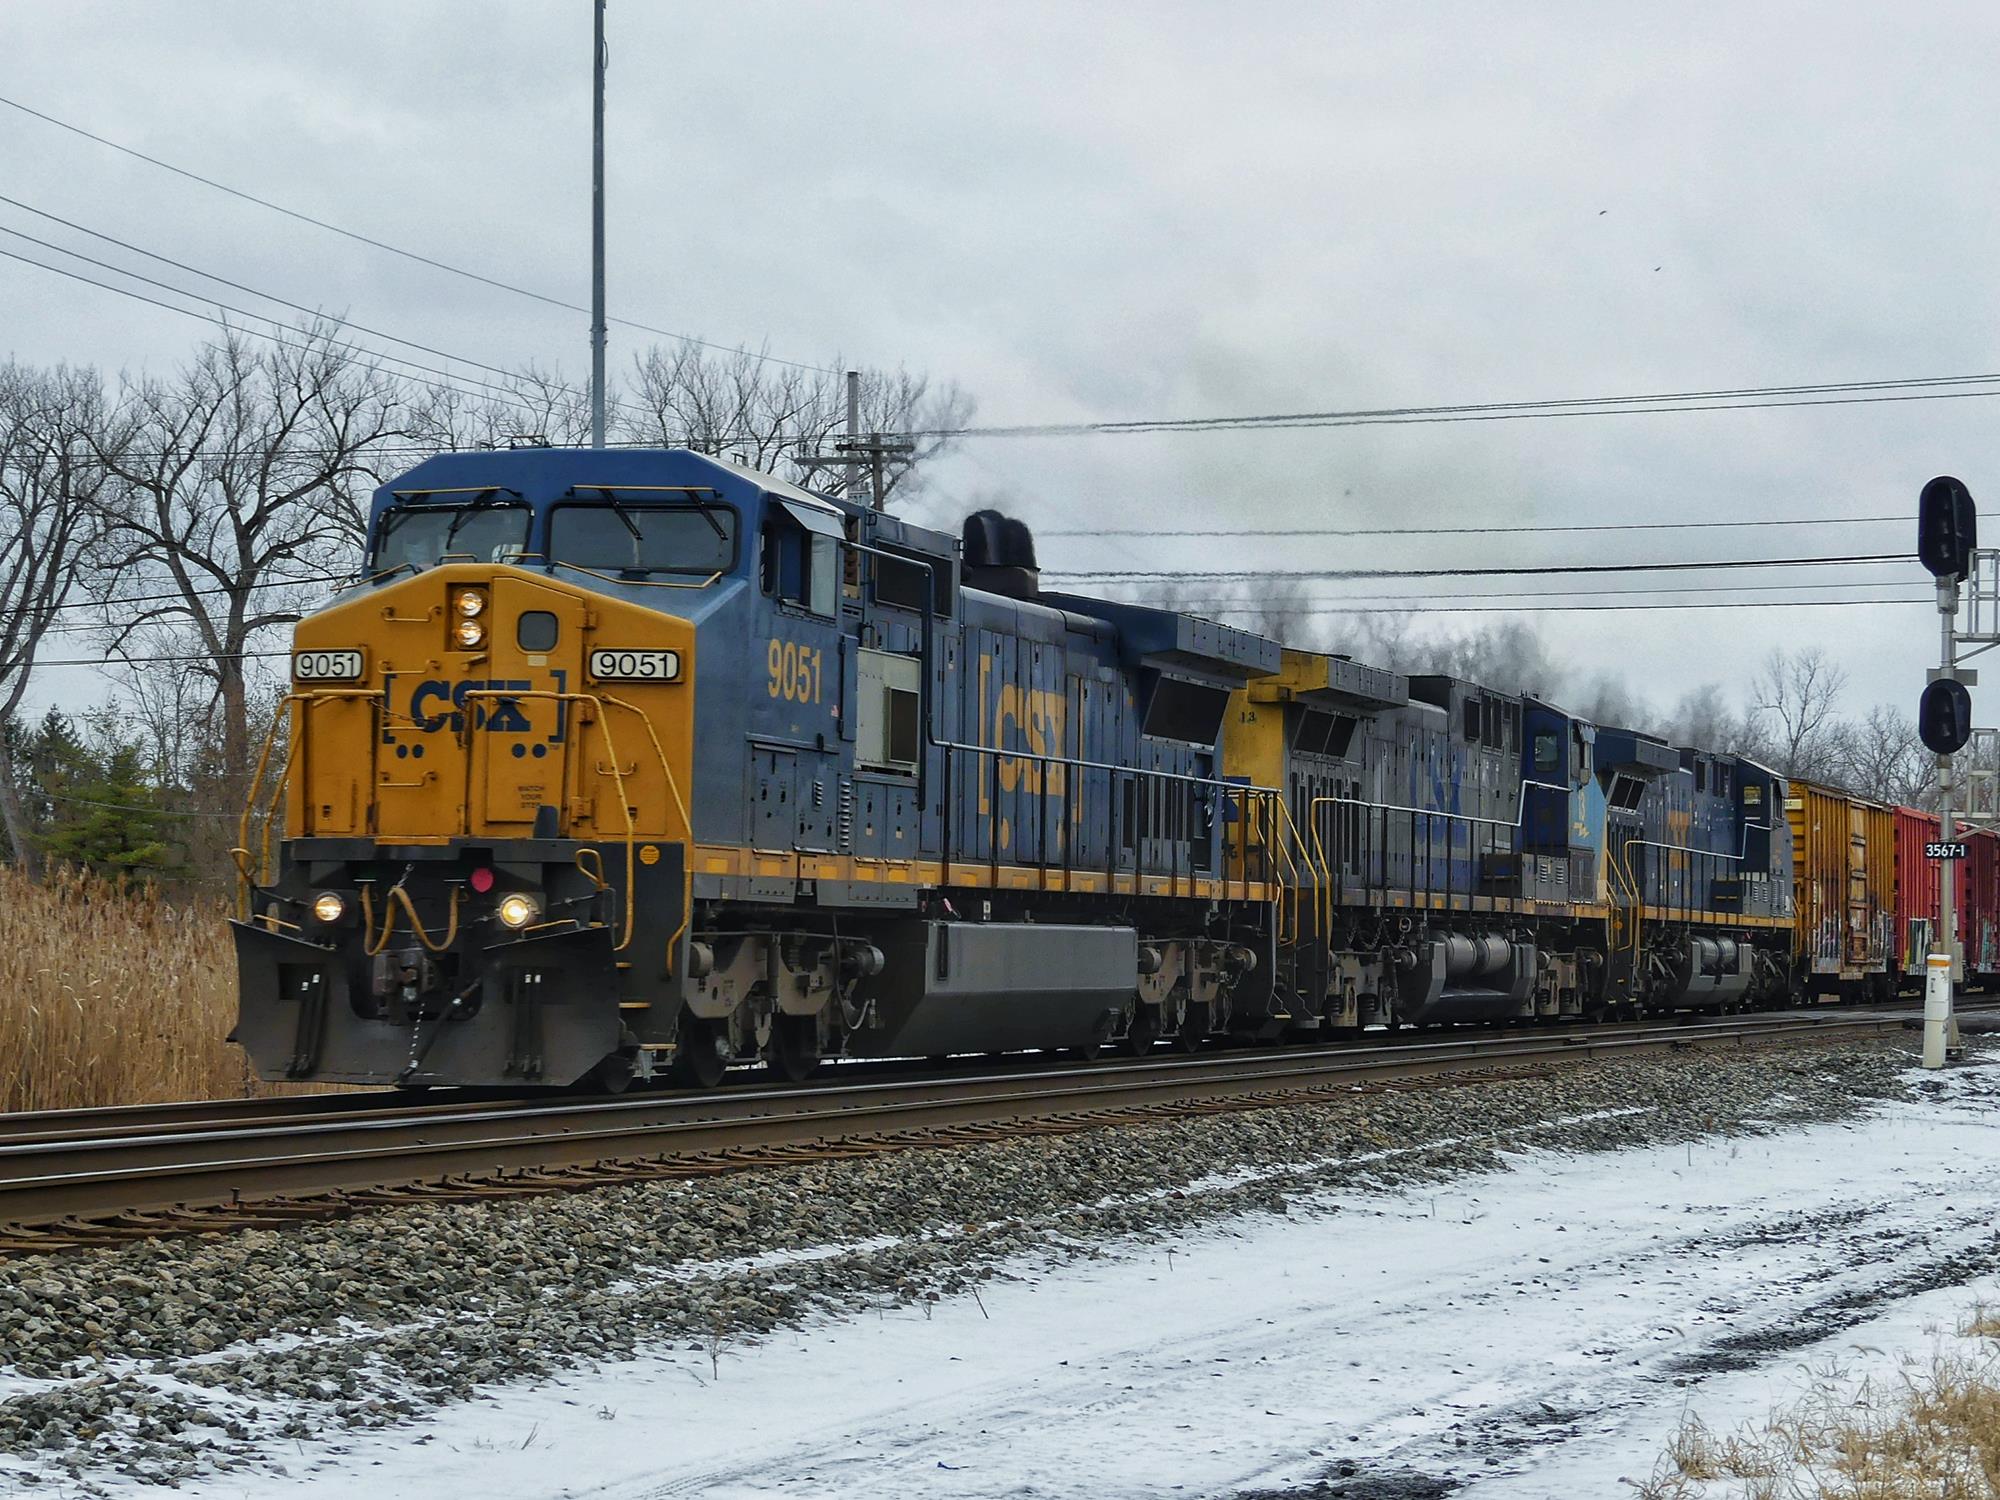 CSX 9051 is a class GE C44-9W (Dash 9-44CW) and  is pictured in Macedon, New York, USA.  This was taken along the Rochester  on the CSX Transportation. Photo Copyright: Scott  Murnan  uploaded to Railroad Gallery on 12/22/2022. This photograph of CSX 9051 was taken on Tuesday, December 20, 2022. All Rights Reserved. 